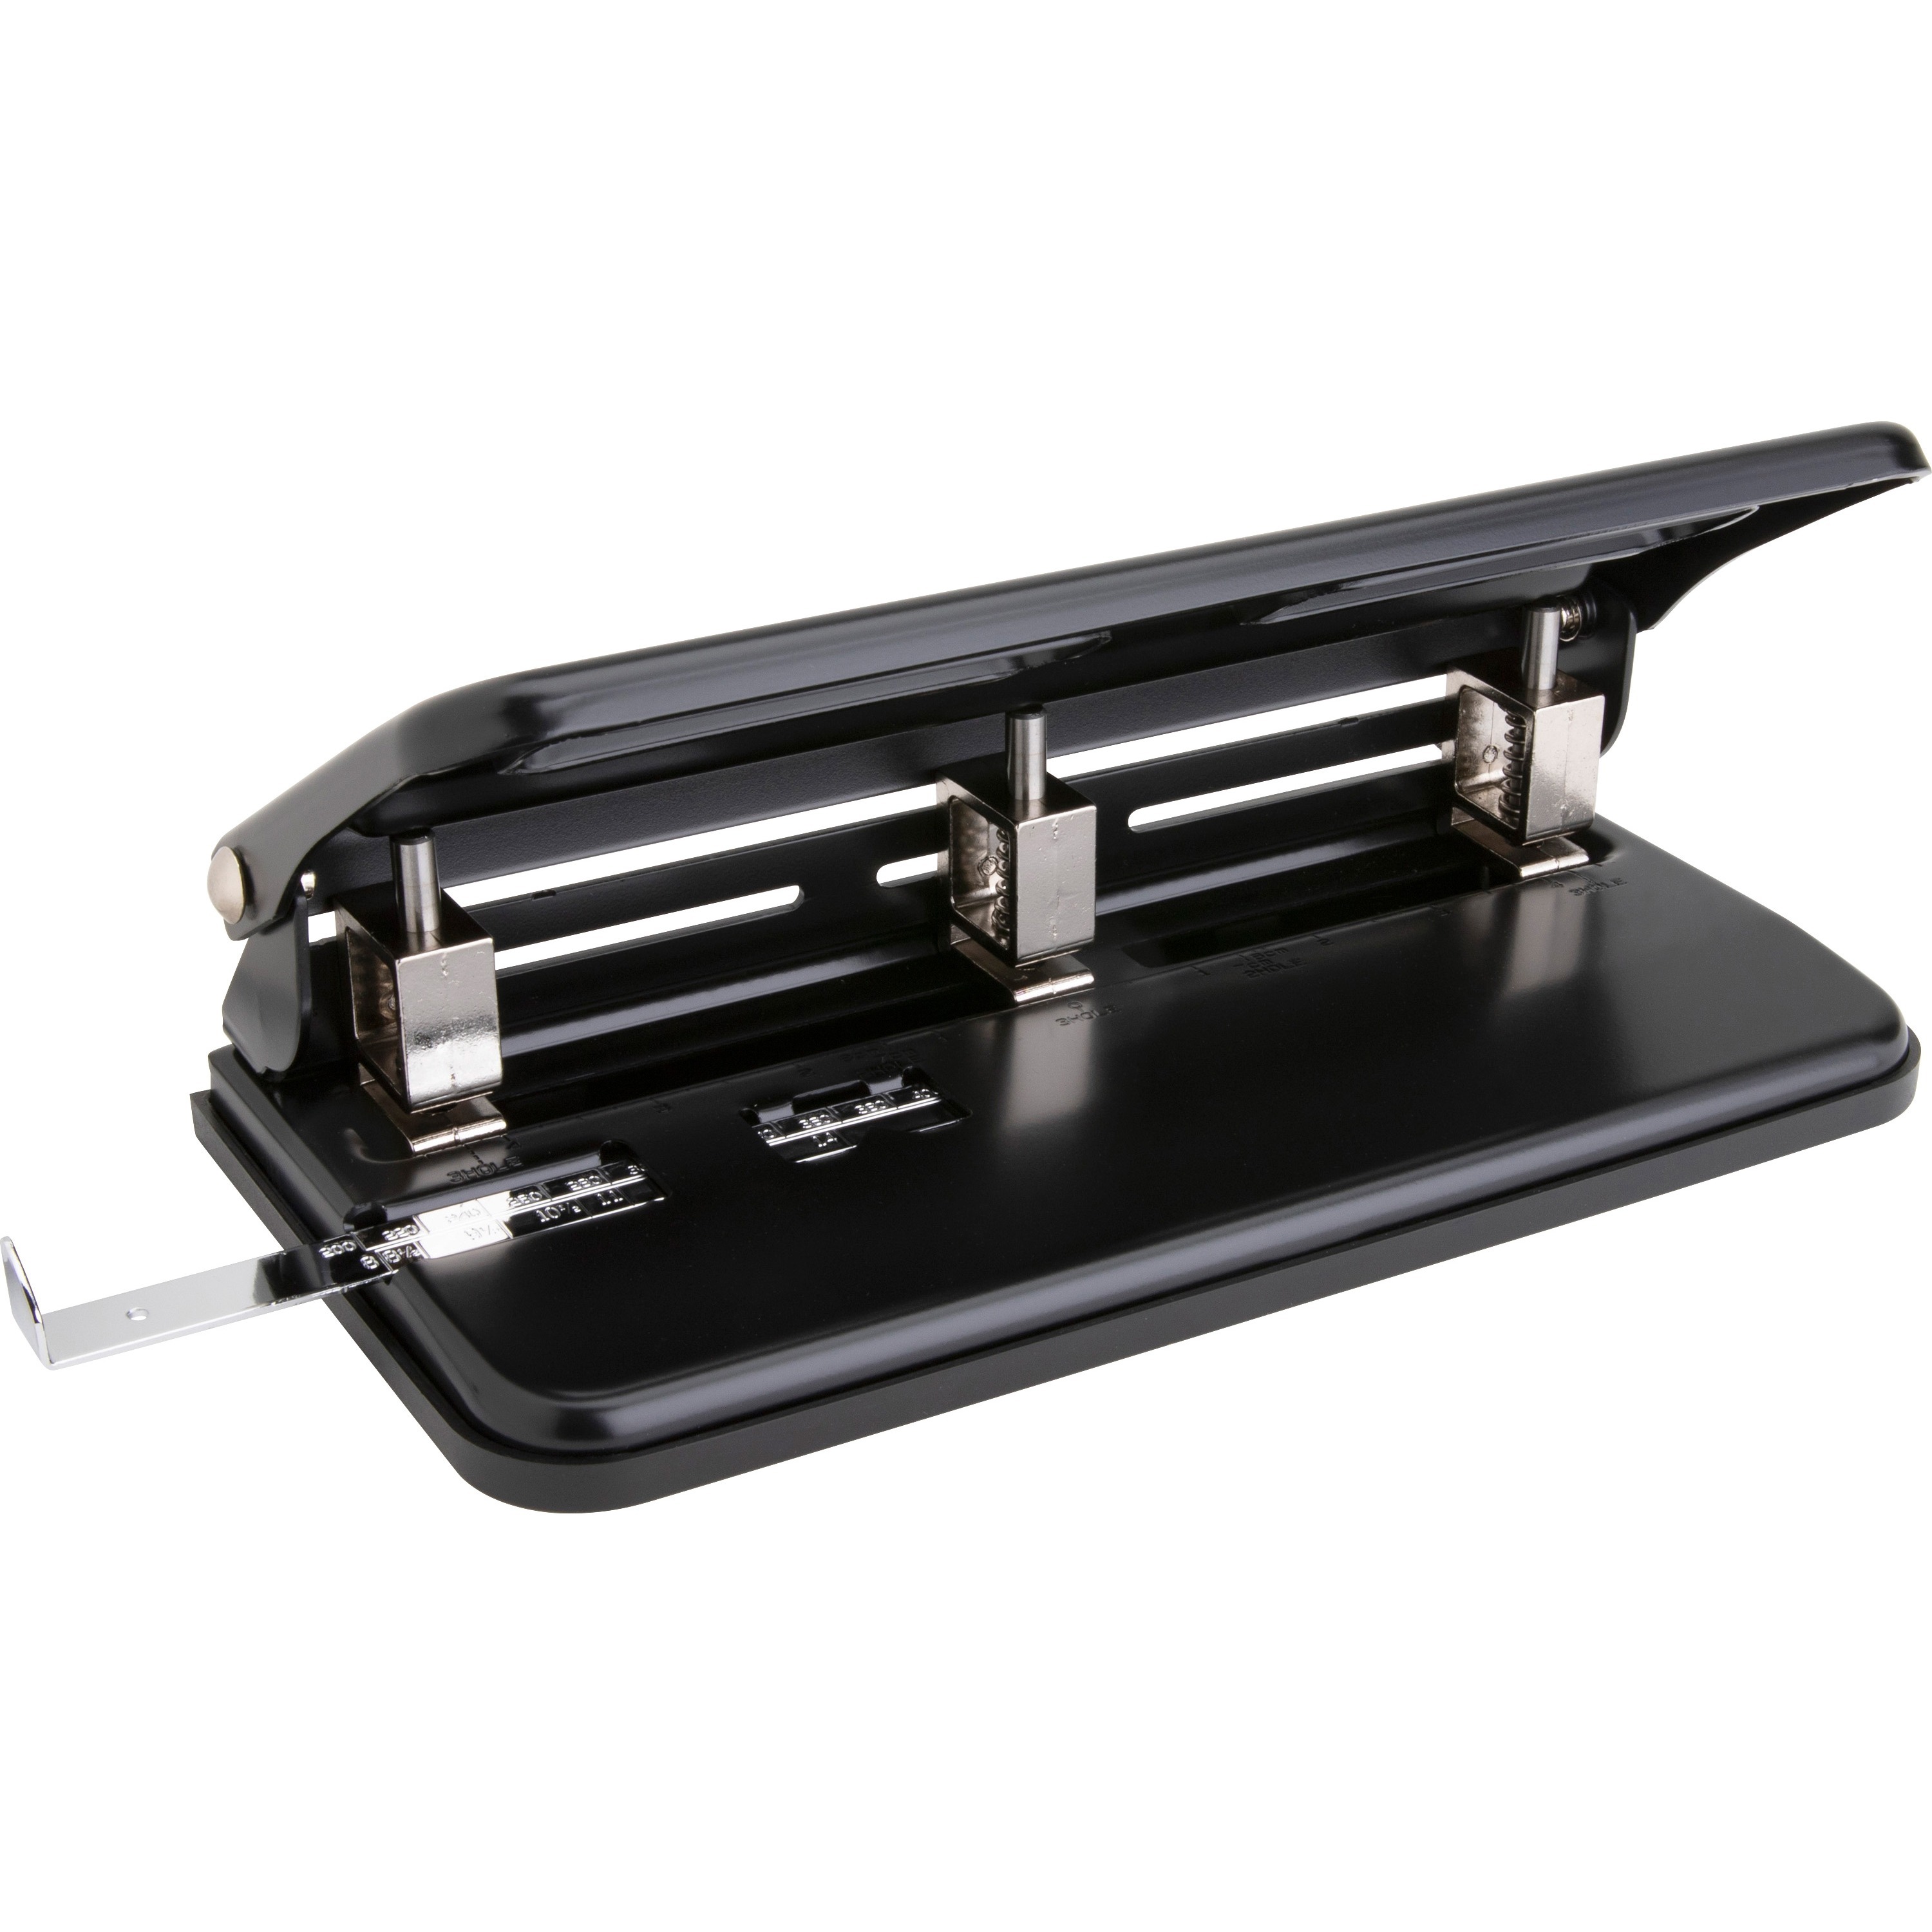 Business Source Heavy-duty 3-hole Punch